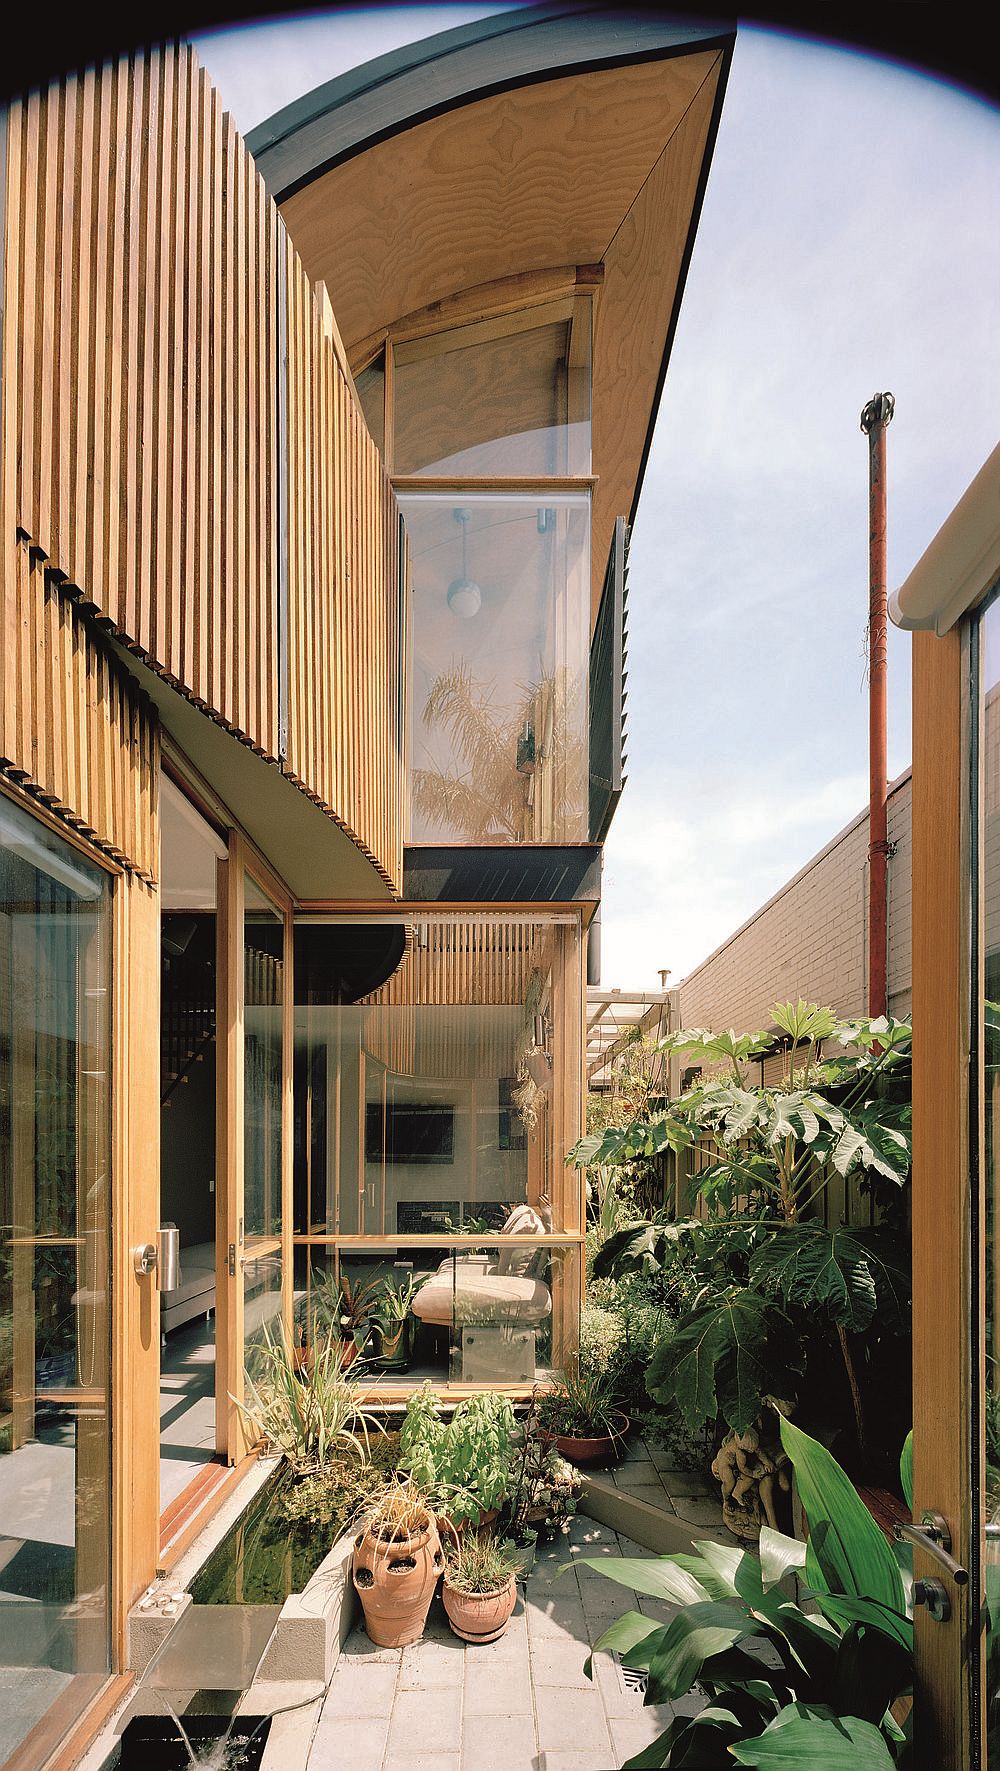 5987c27a3a533Large-wooden-fence-helps-create-a-green-courtyard-inside-the-Melbourne-home